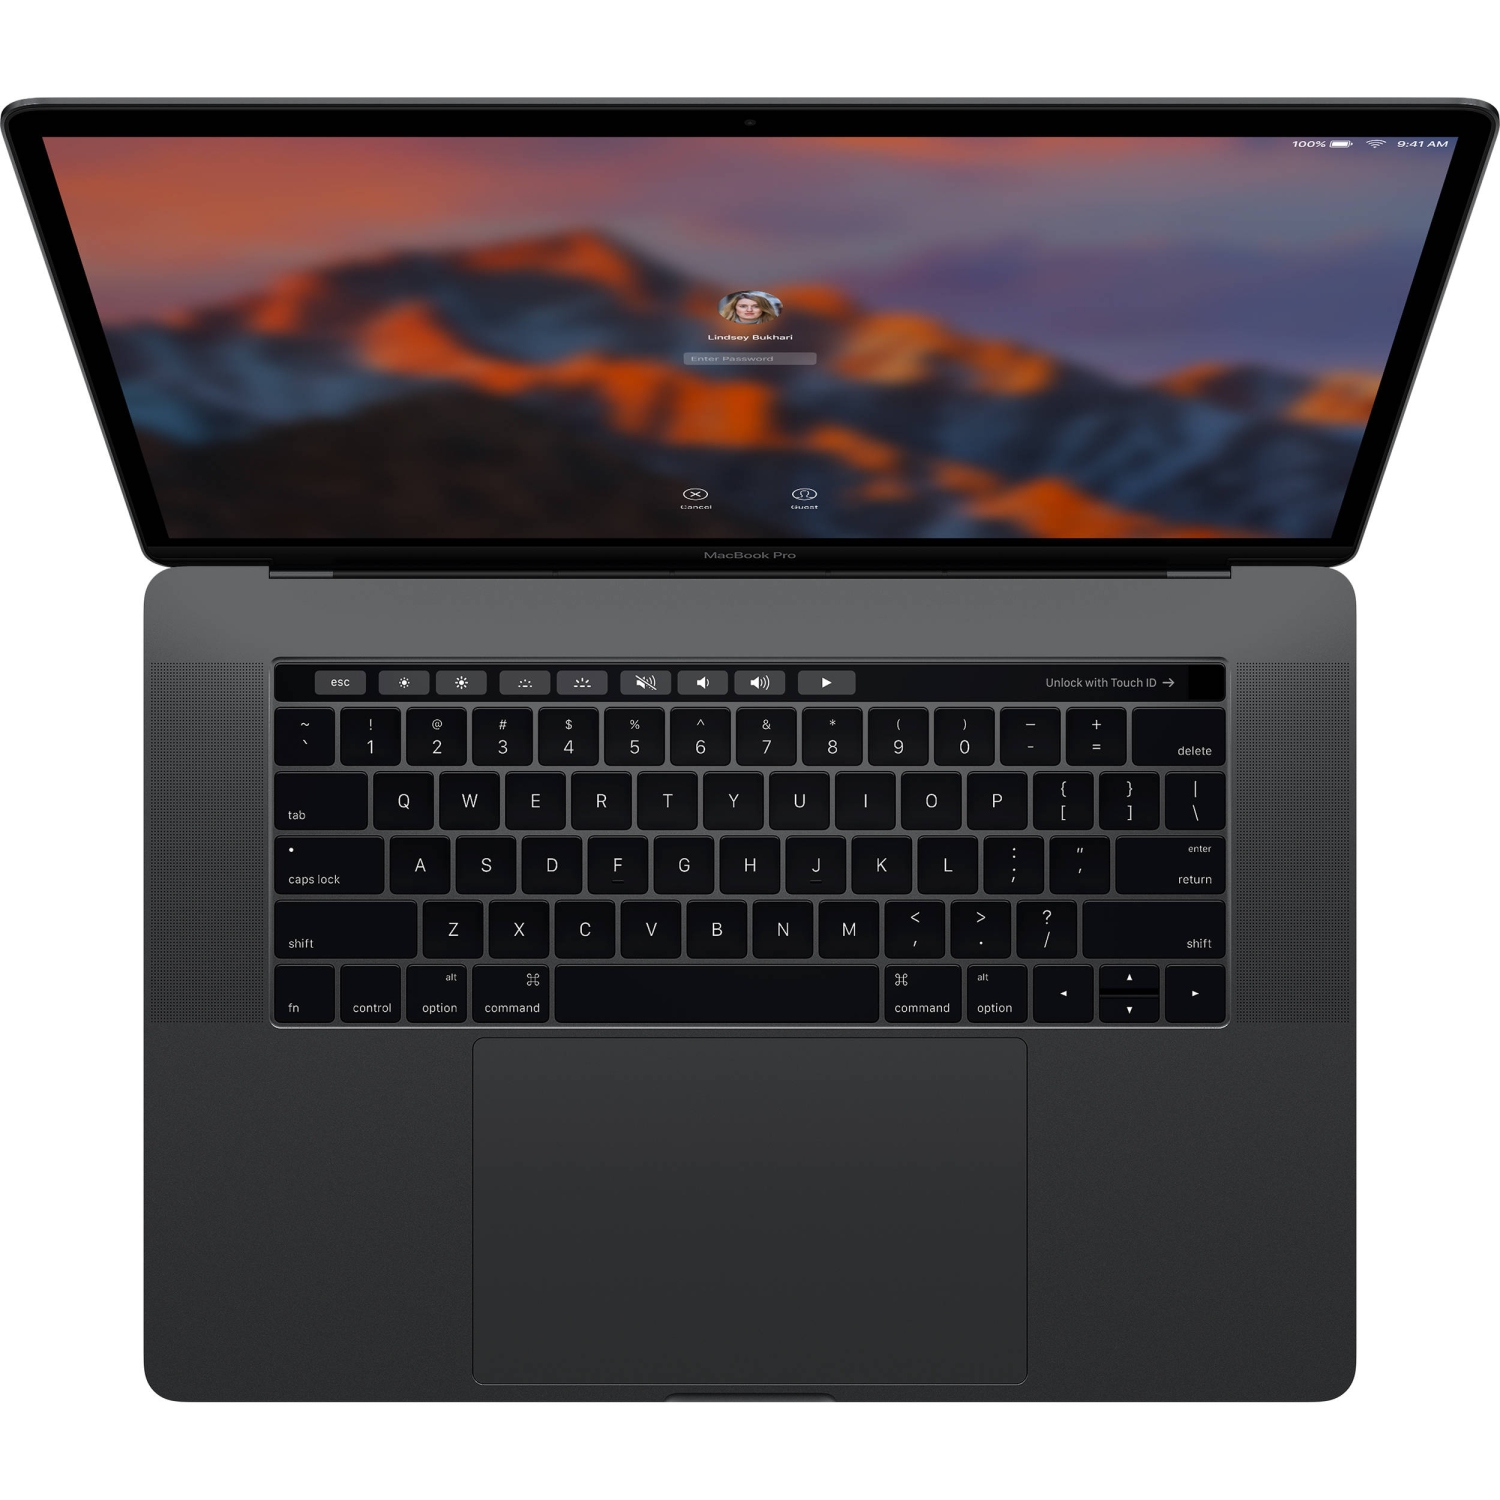 Refurbished (Excellent) - MacBook Pro 15" Retina 2.9GHz i7 16GB / 1TB / Touch Bar - Silver - 2016 Model! - Refurb, Gr A, Excellent Condition, 9/10!